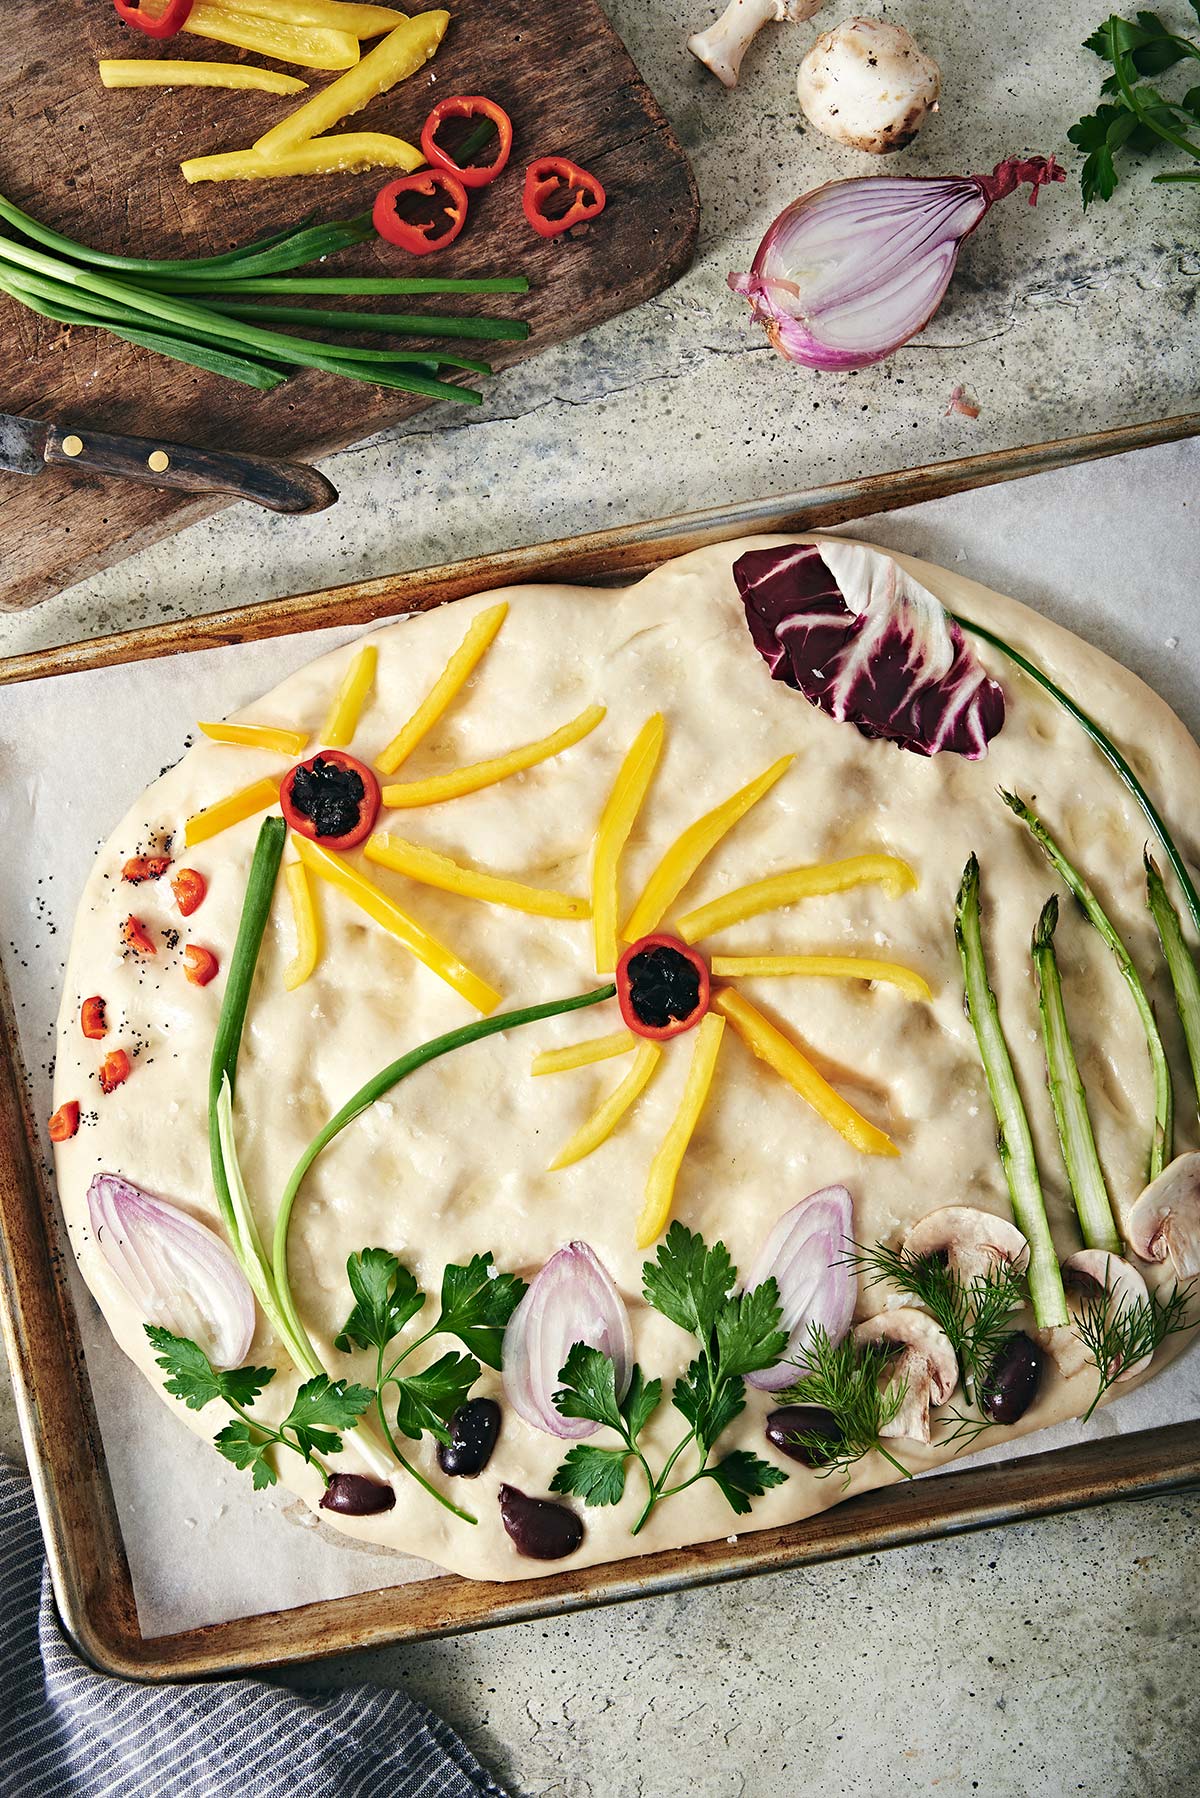 A garden focaccia about to be baked